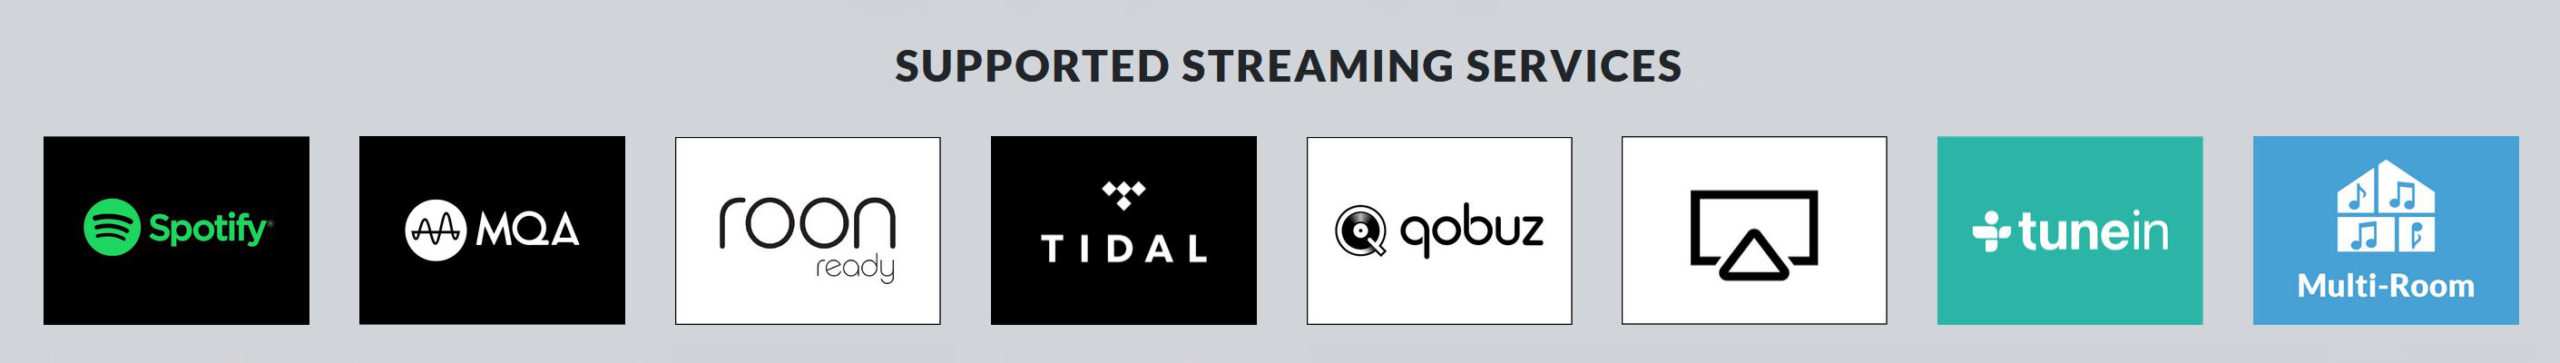 T2 Supported Streaming Service